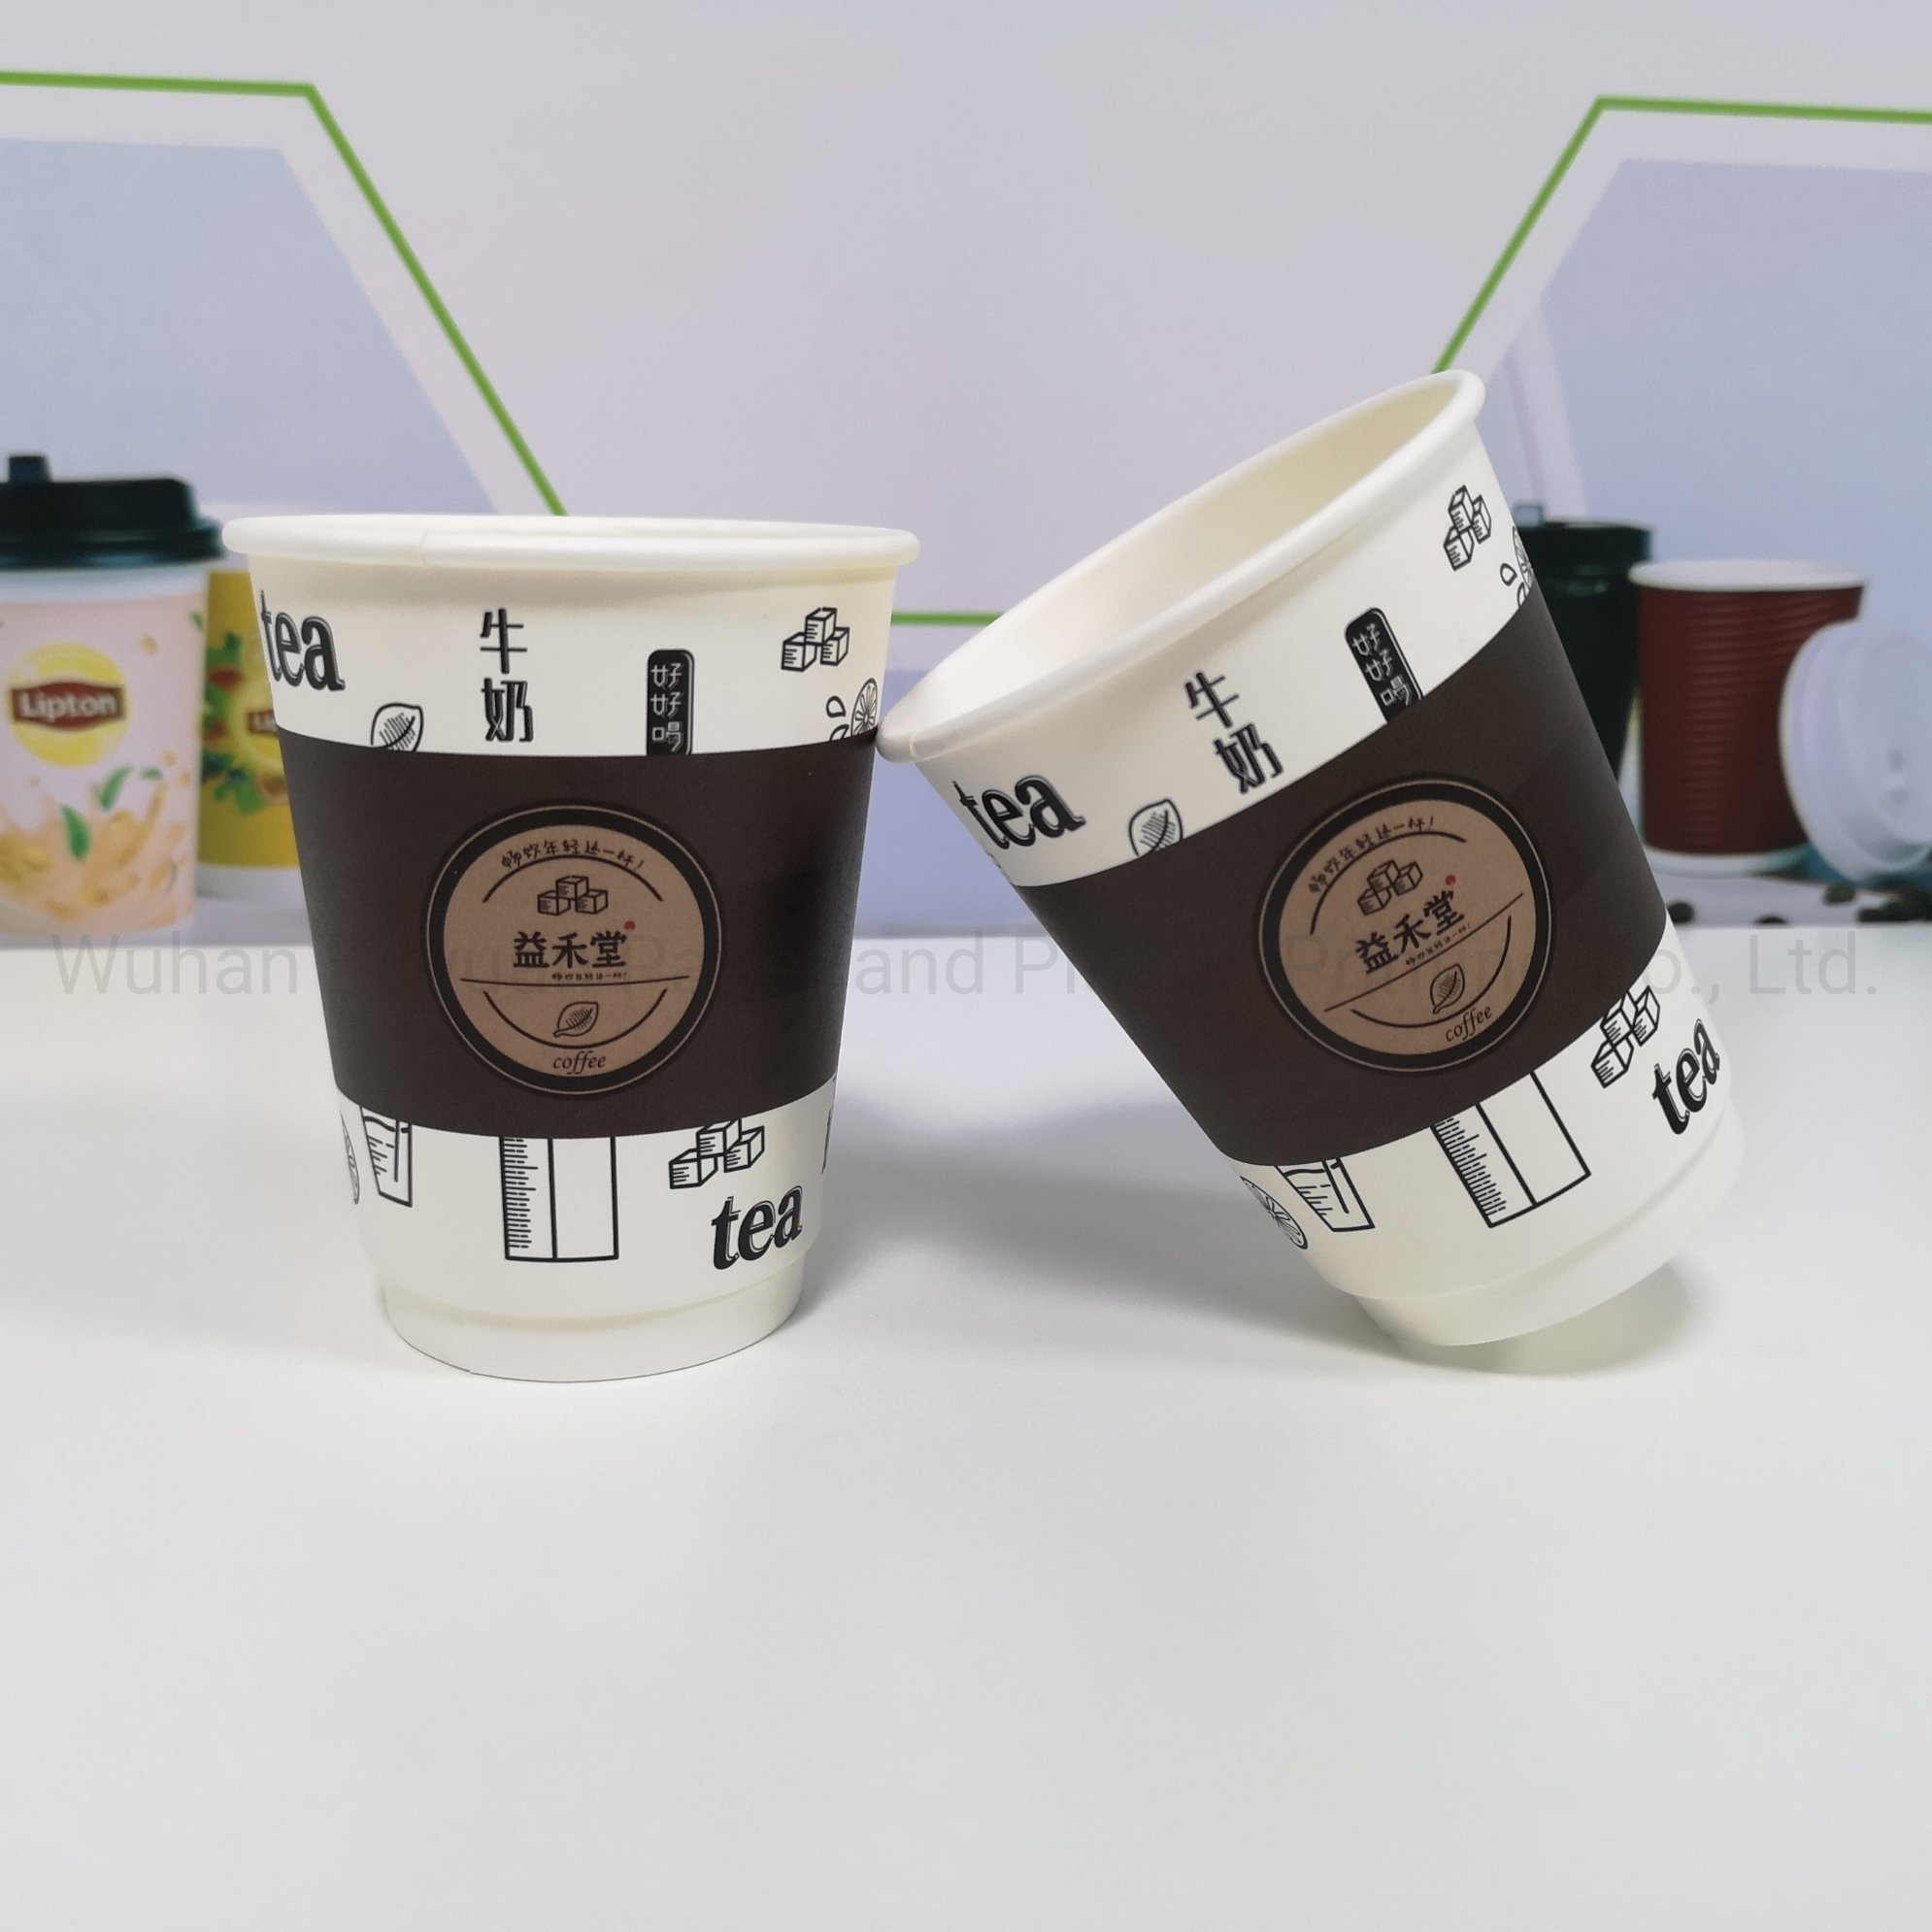 China Manufacturer Disposable Double Wall Paper Cup